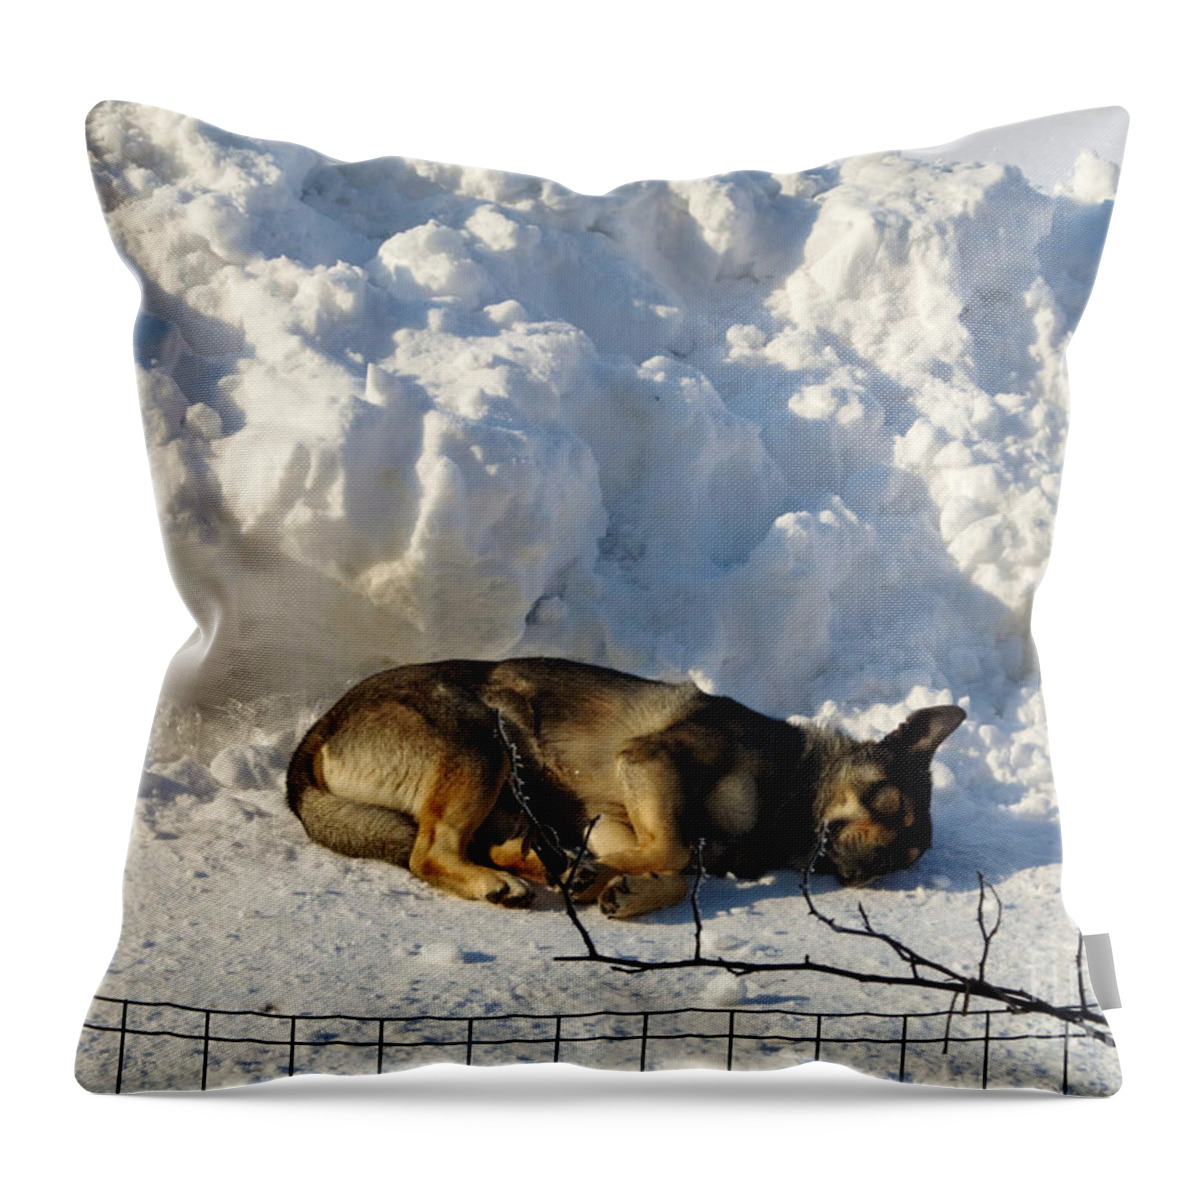 Lazy Throw Pillow featuring the photograph Tommy Sleeping by Ramona Matei